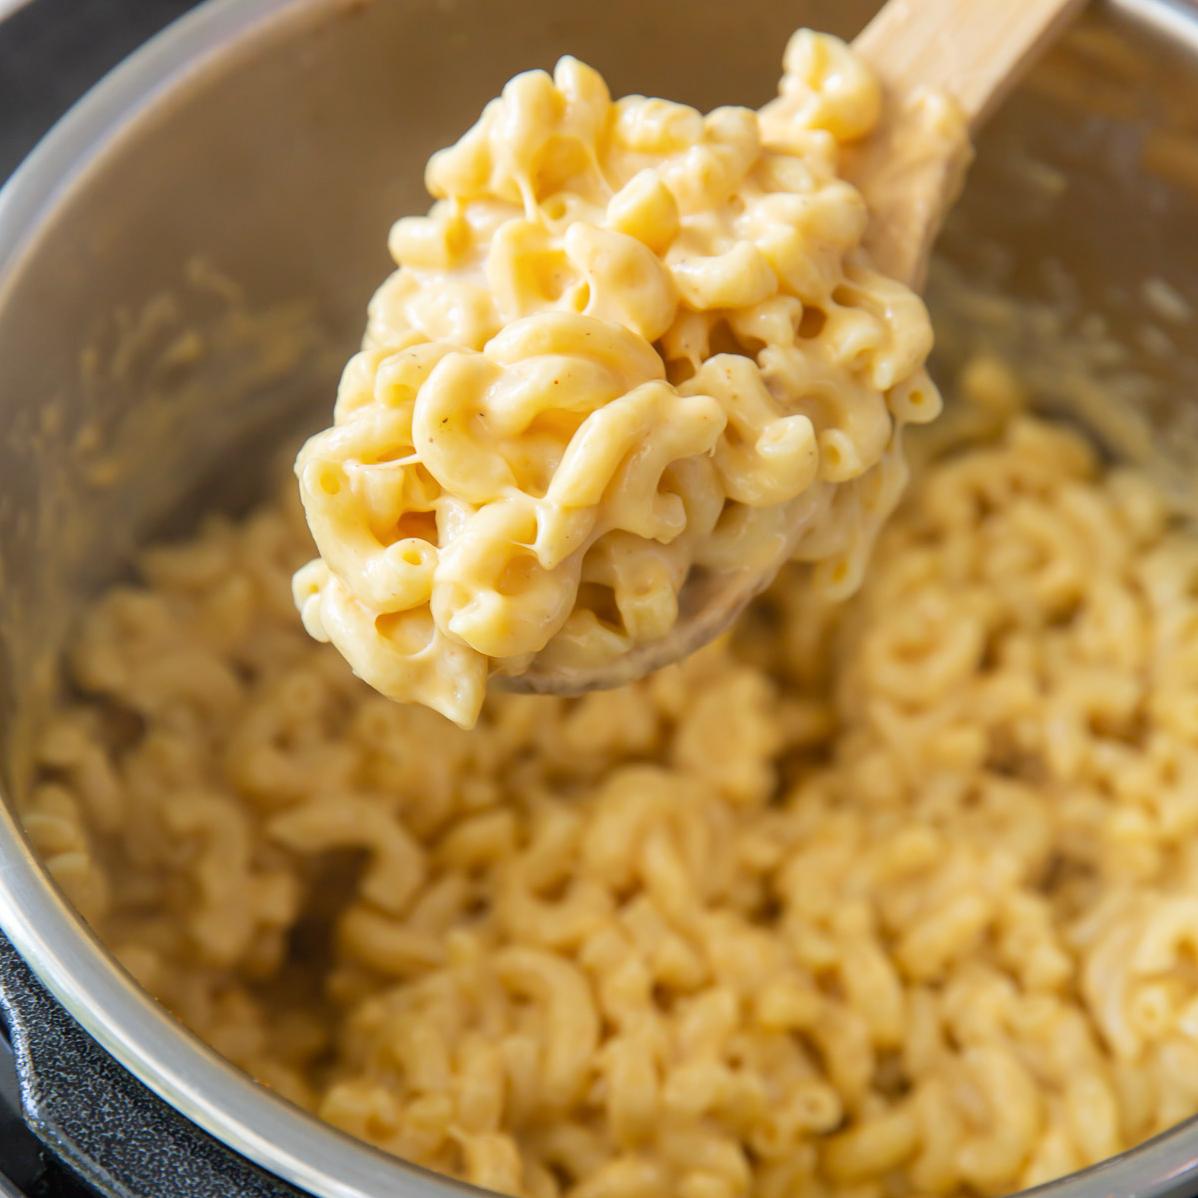  Get ready for mac and cheese like you've never tasted before.